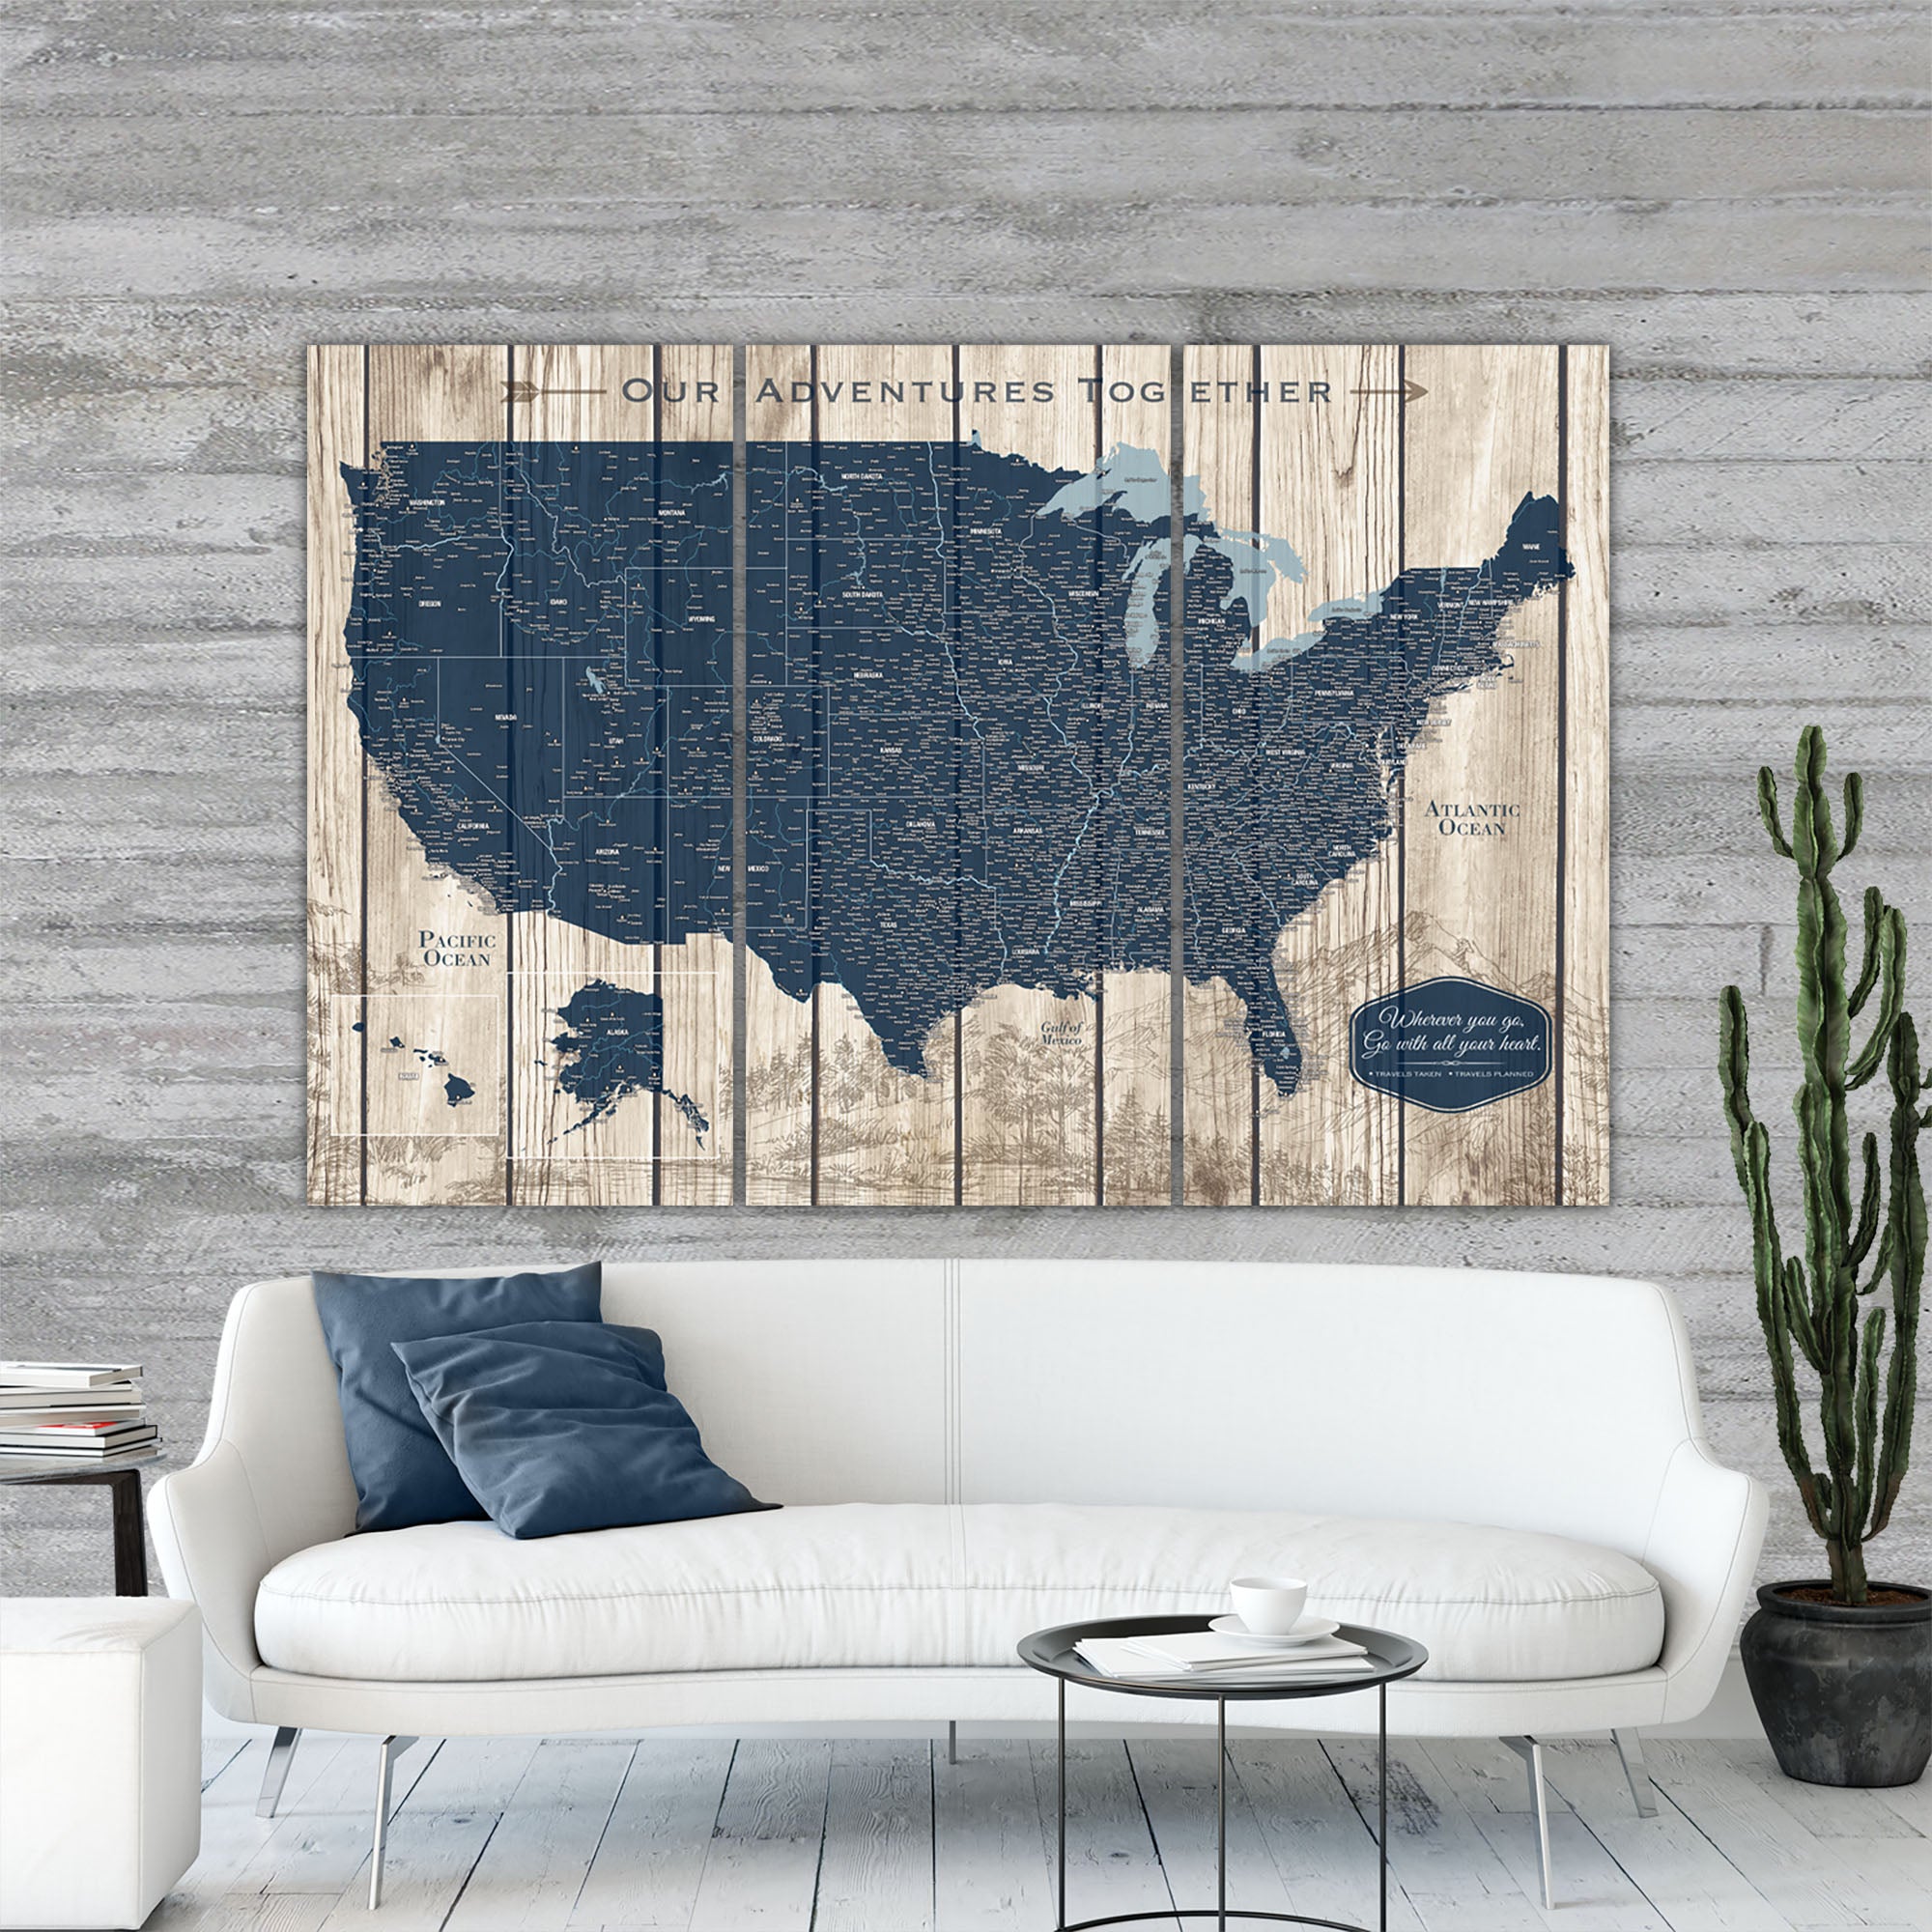 Pin on Rustic living room